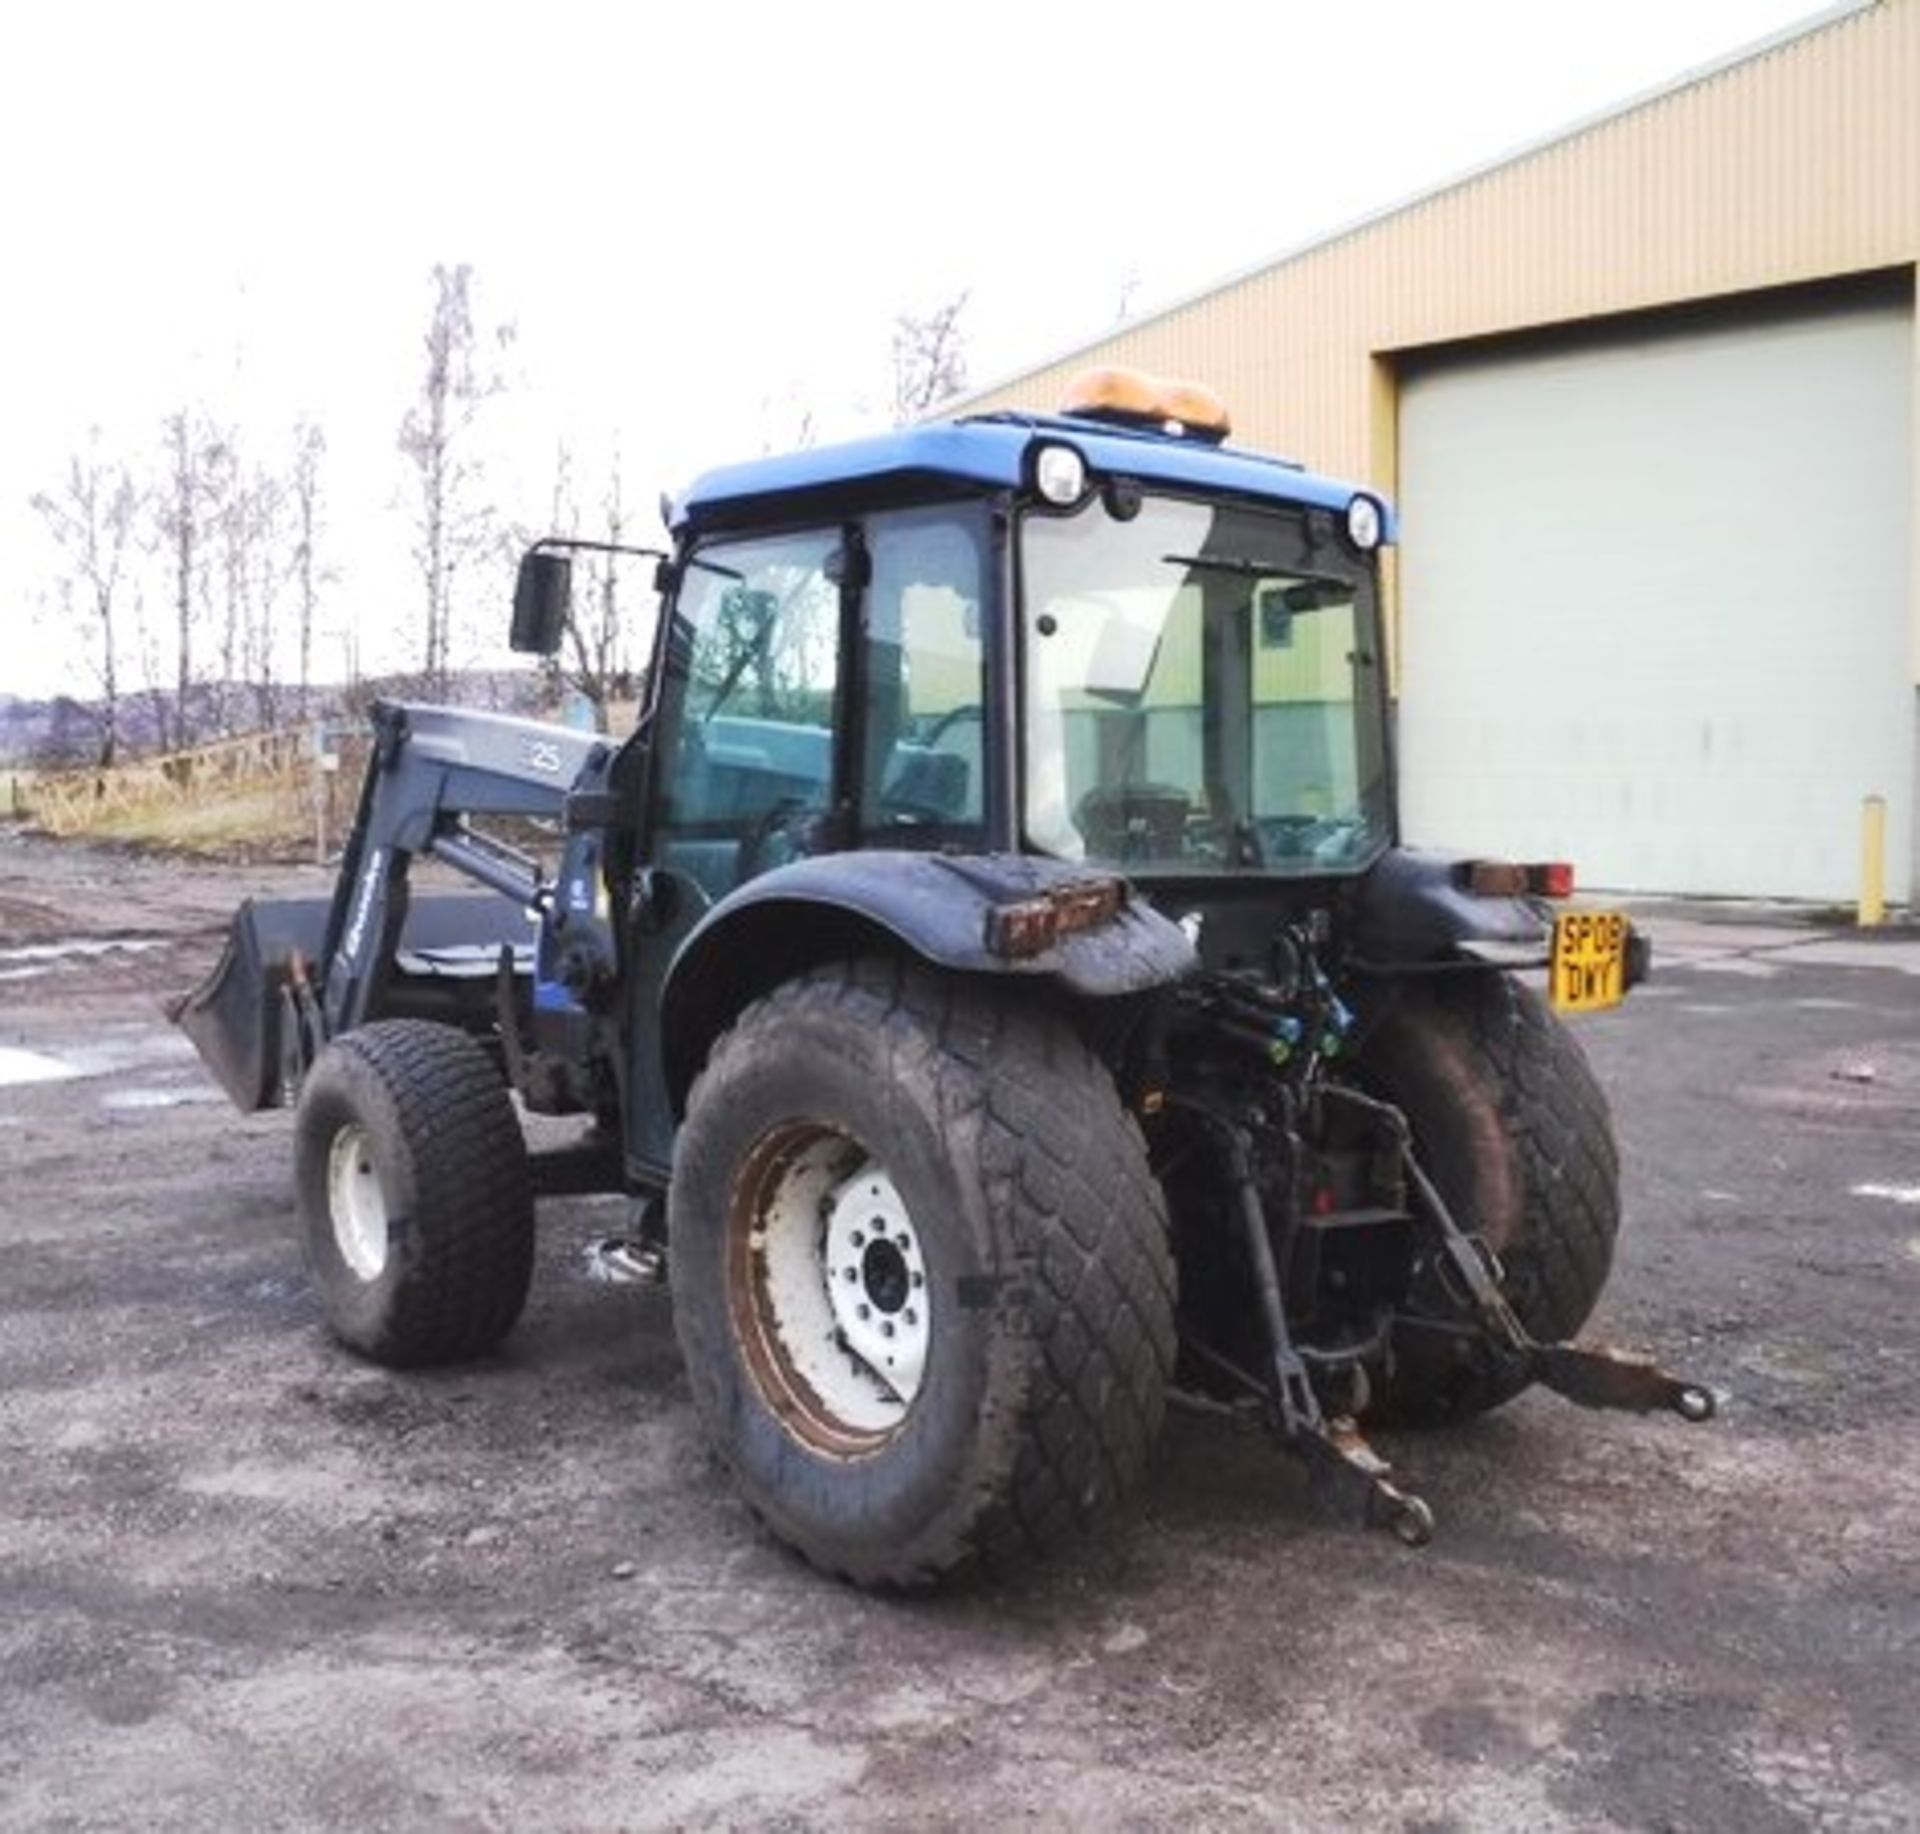 2008 NEW HOLLAND TN60 TRACTOR. REG NO SP08 DWY. SN 111054. GVW(TONNES) 4497, 3062HRS (NOT VERIFIED) - Image 6 of 40